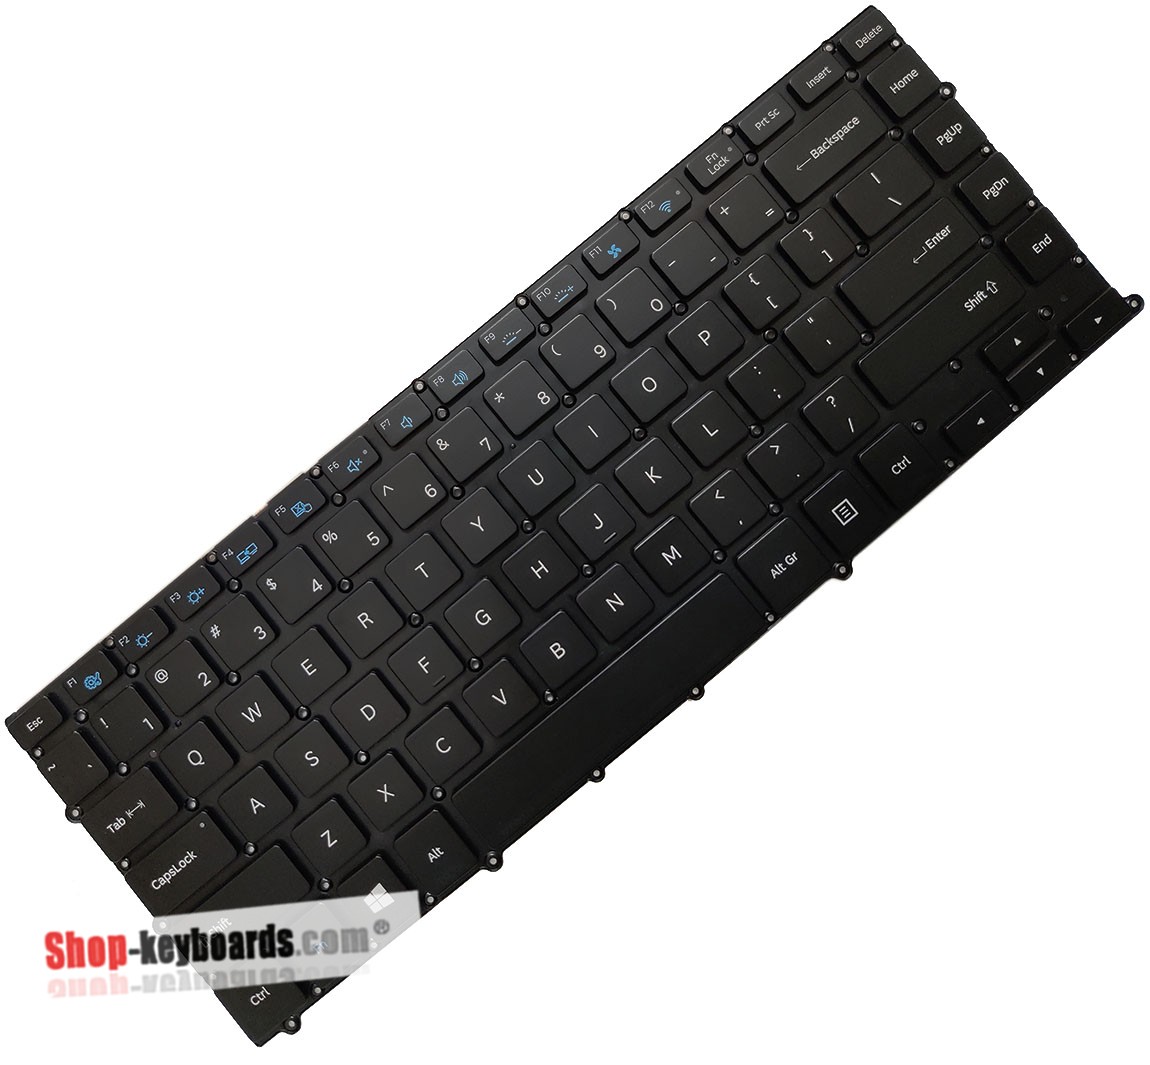 Samsung NT900X4C-A502Z  Keyboard replacement